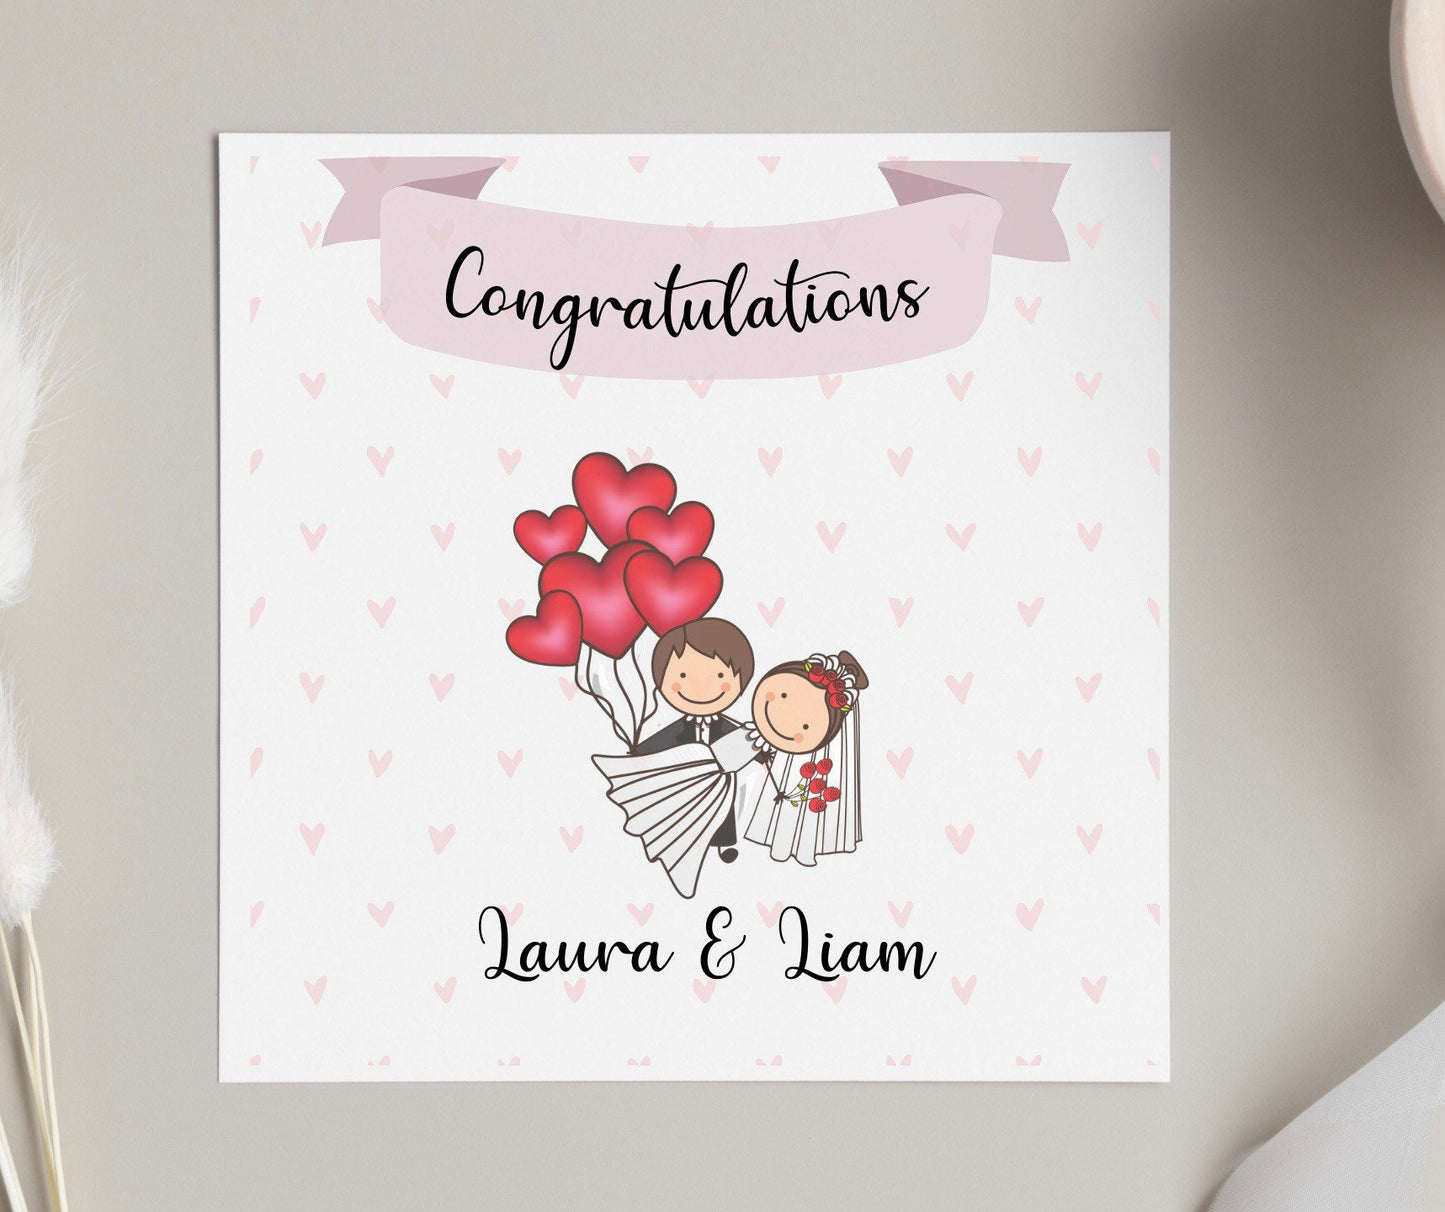 Congratulations on wedding day card, personalised wedding card for friends. Bride and groom couple cards